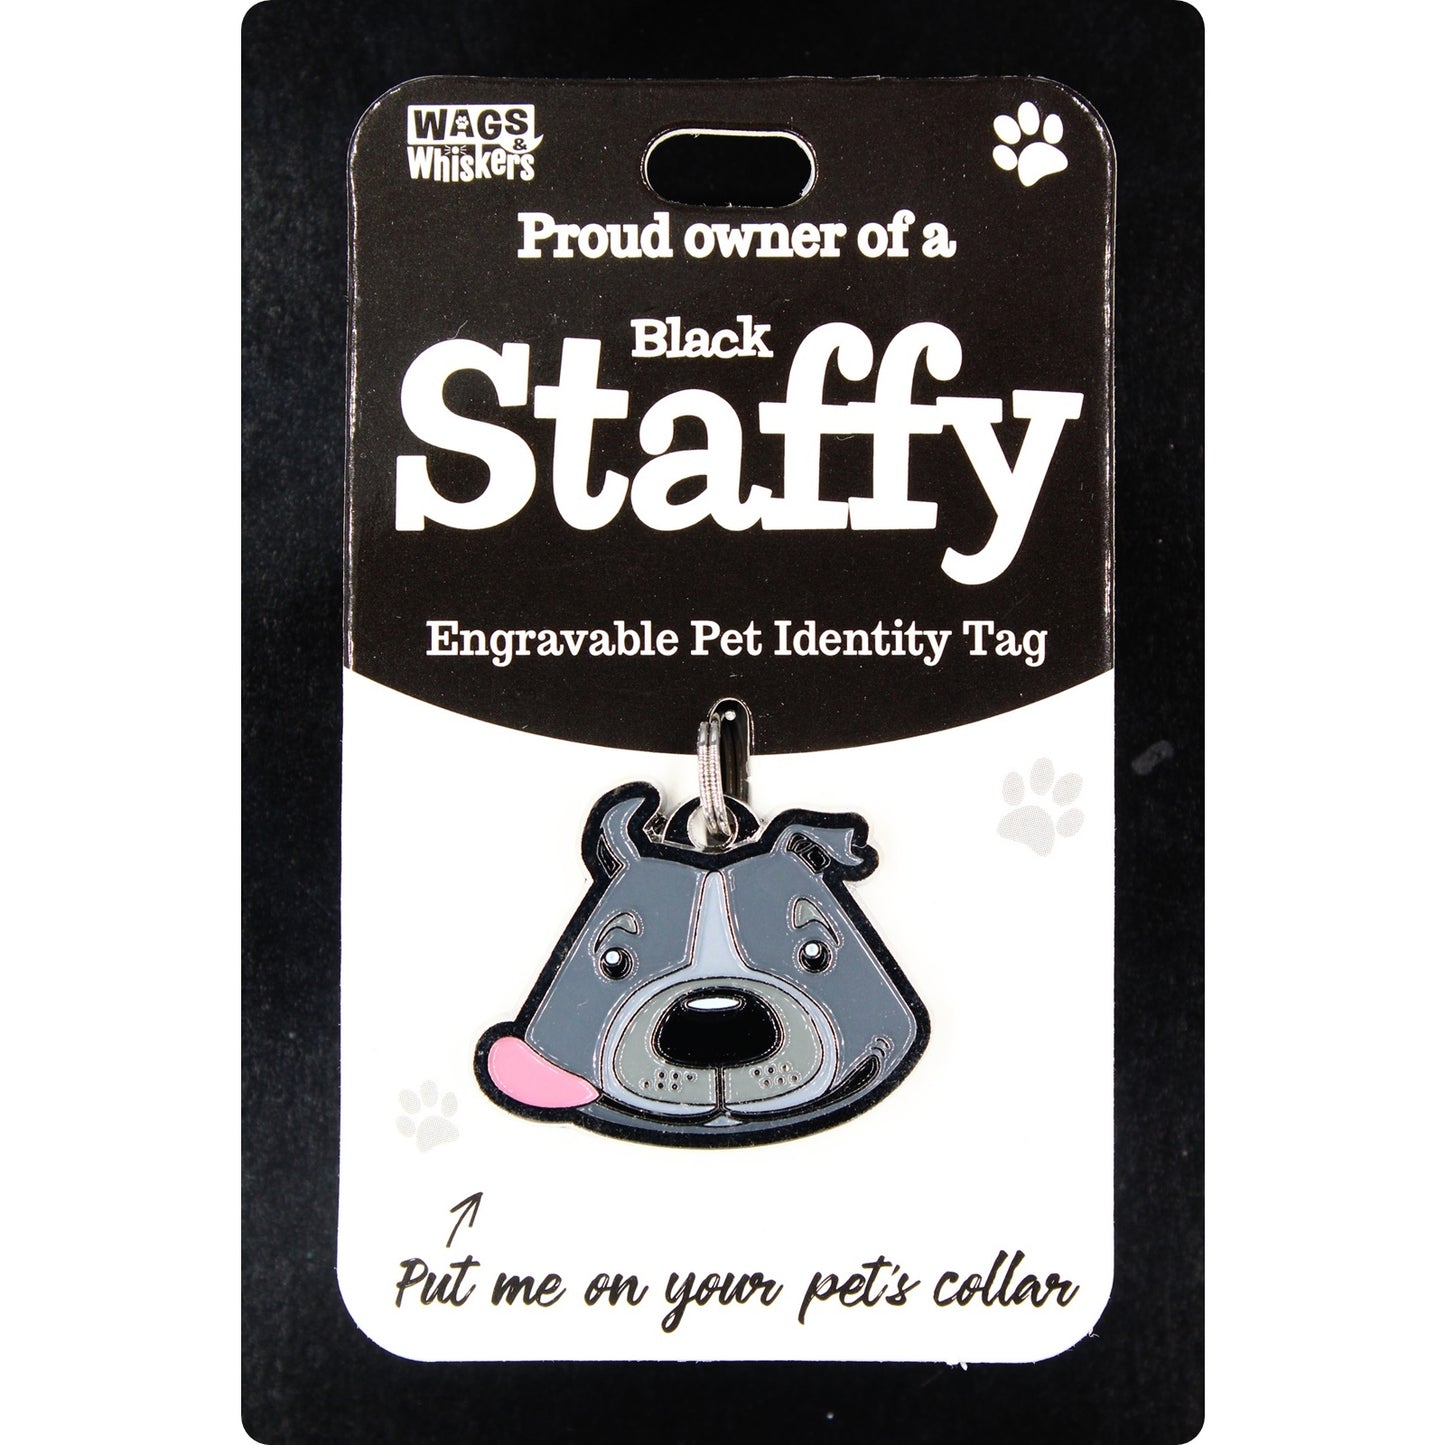 DESIRABLE GIFTS BLACK STAFFY WAGS & WHISKERS DOG PET TAG I CAN NOT ENGRAVE THIS ITEM